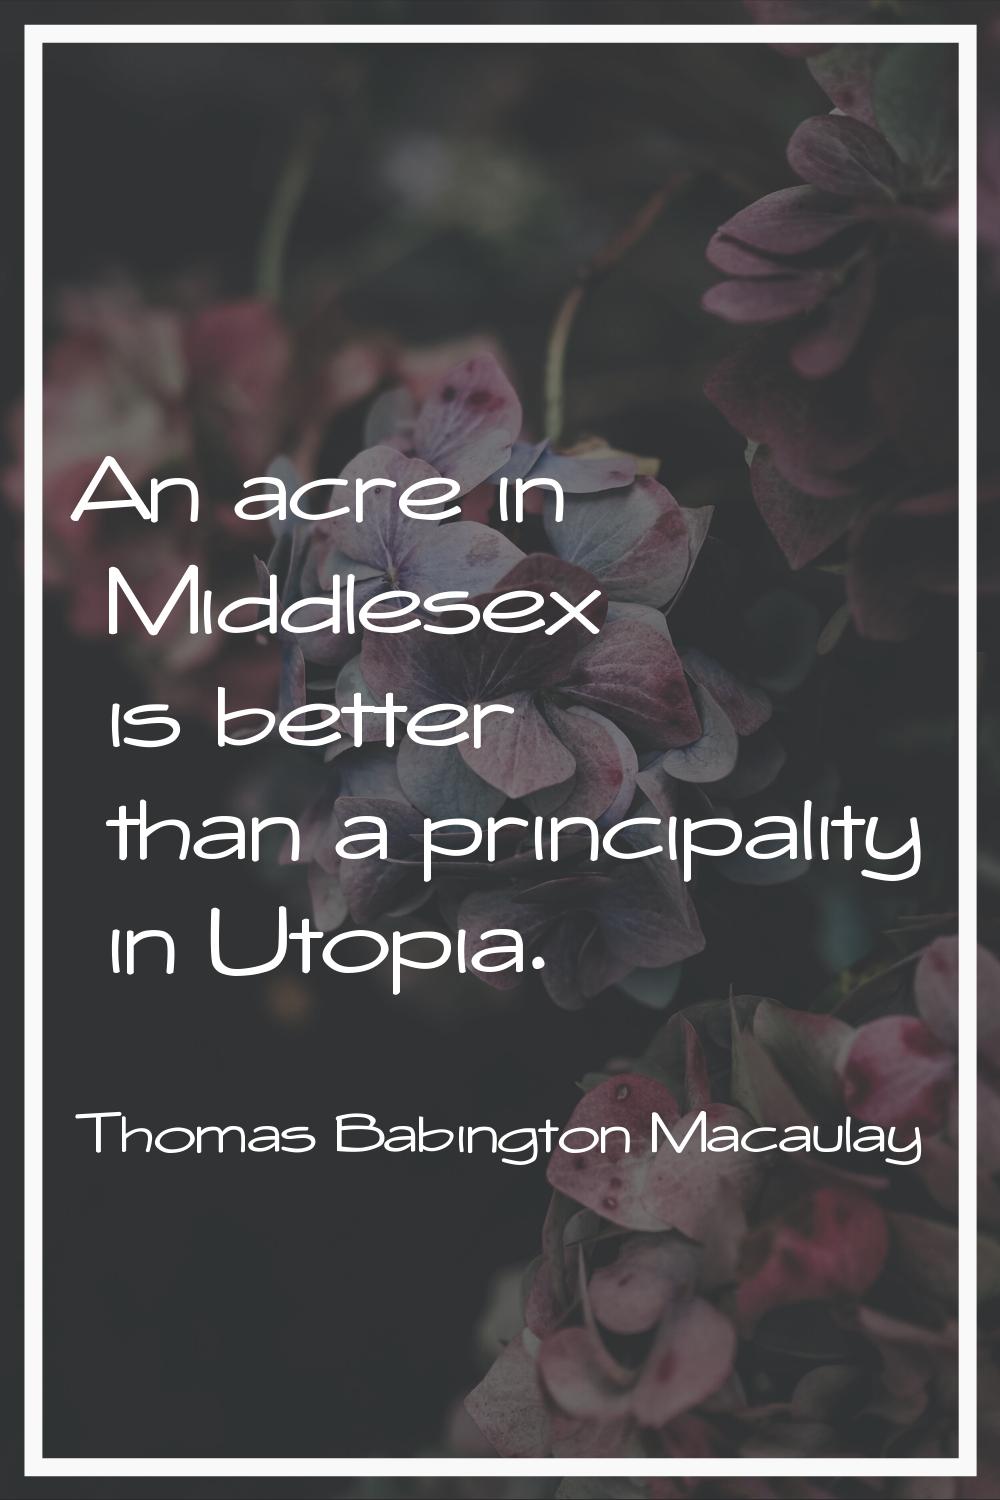 An acre in Middlesex is better than a principality in Utopia.